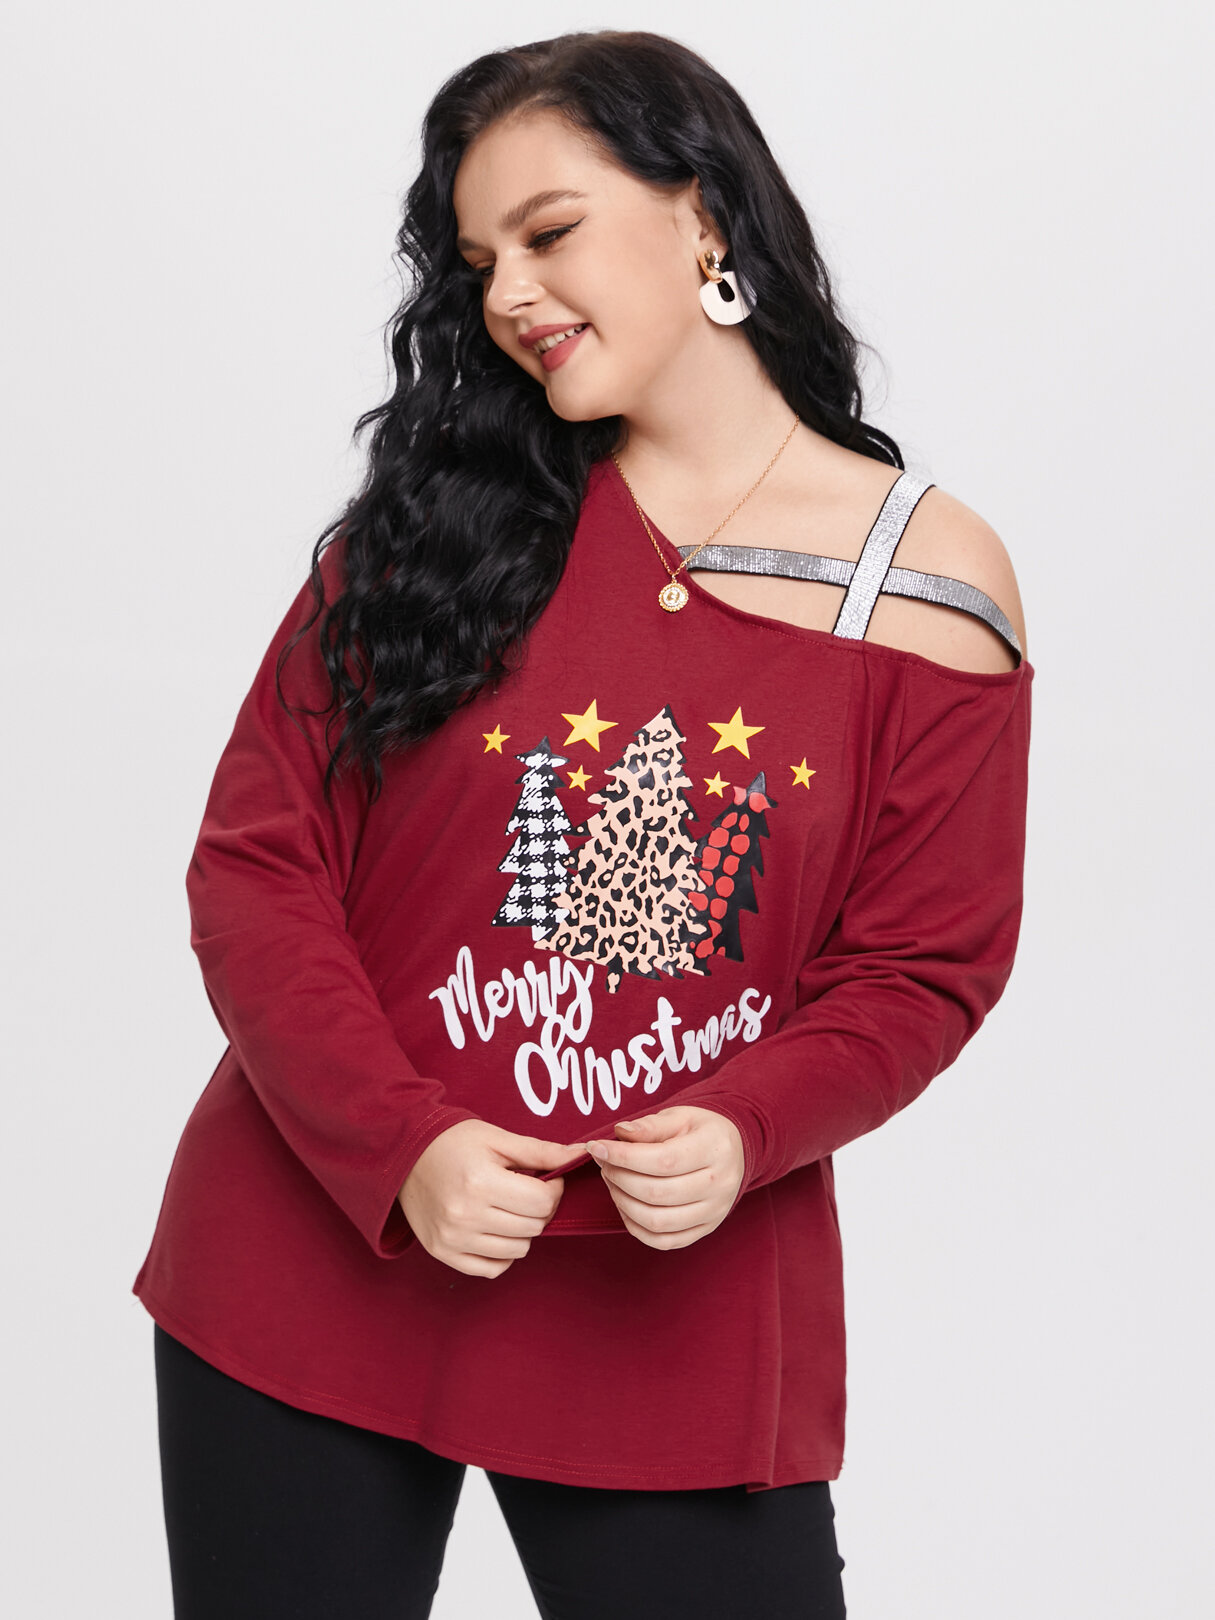 Plus Size Letter Graphic Criss-Cross Patchwork Tee, Wine red;gray